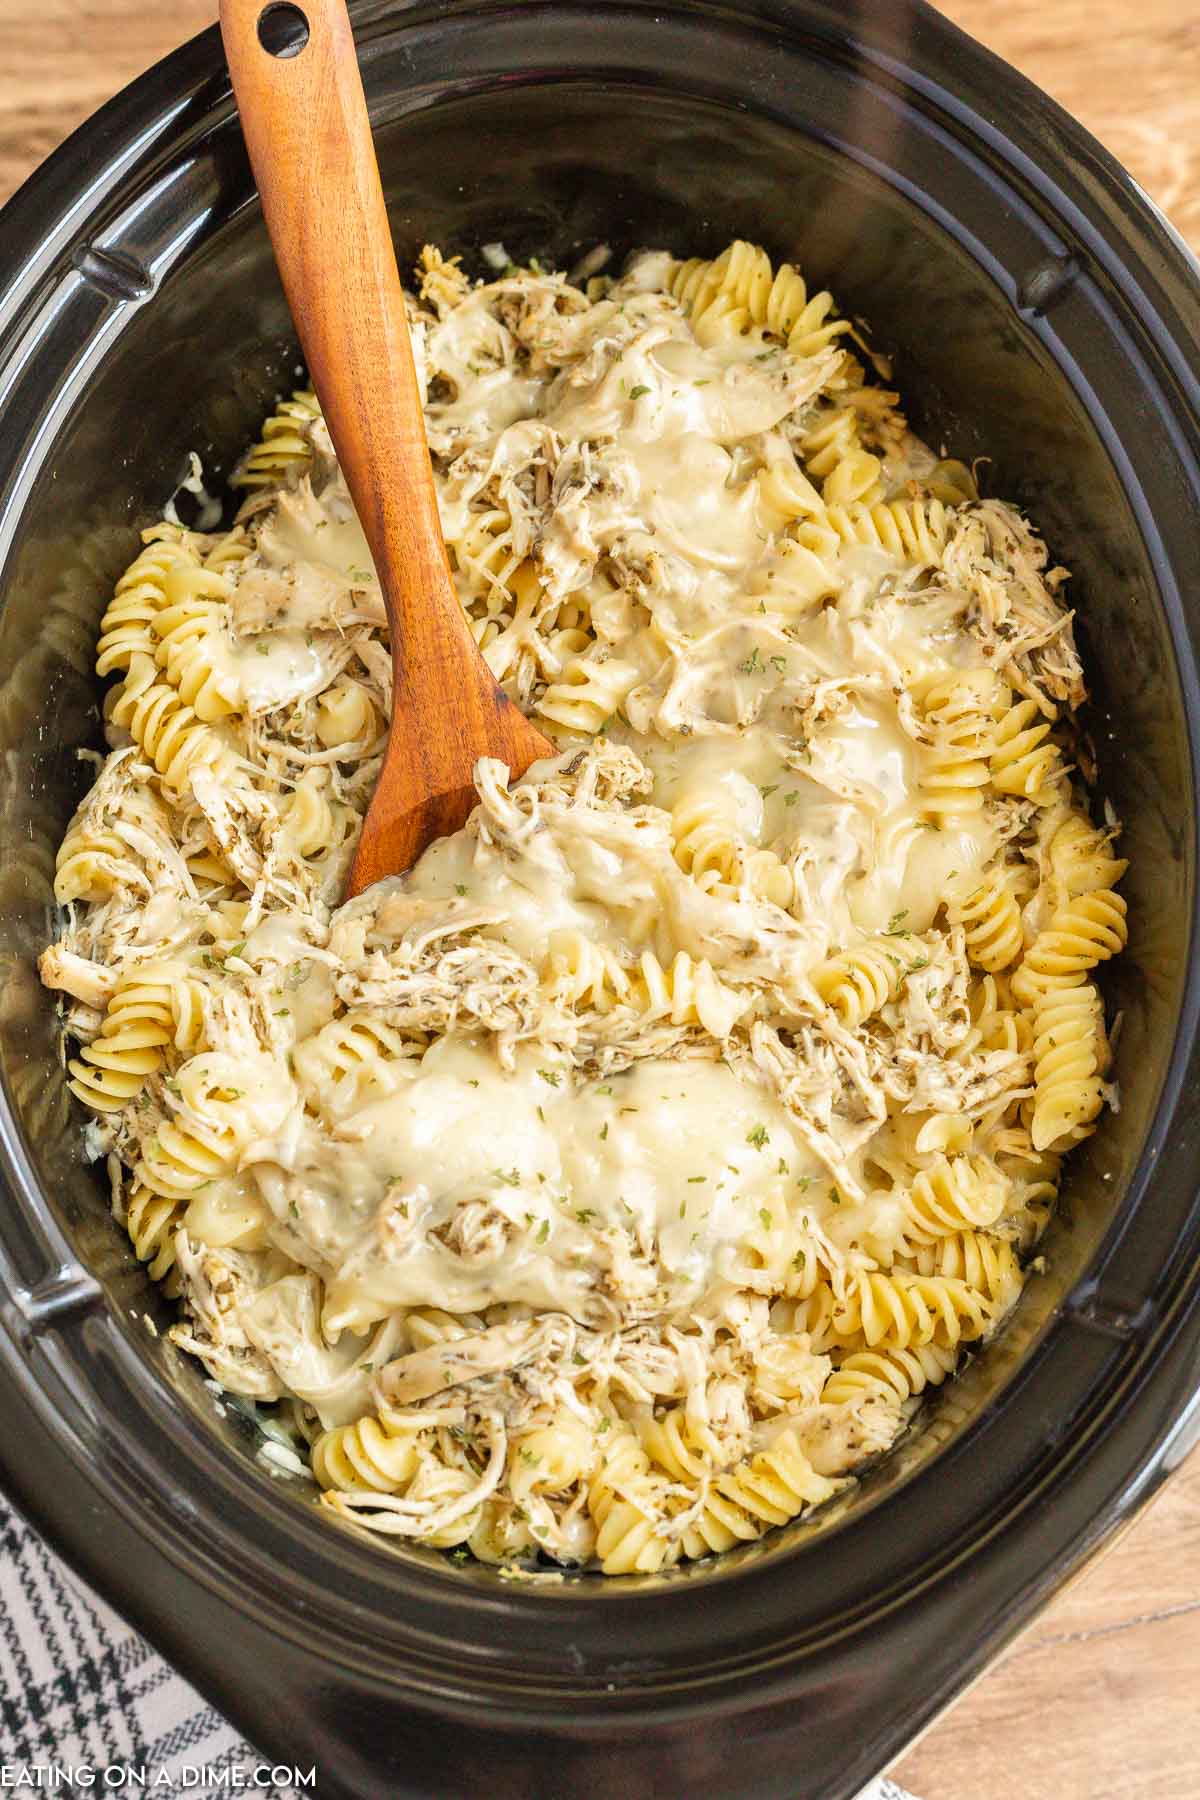 Pesto Chicken Pasta Casserole in the slow cooker with a wooden spoon